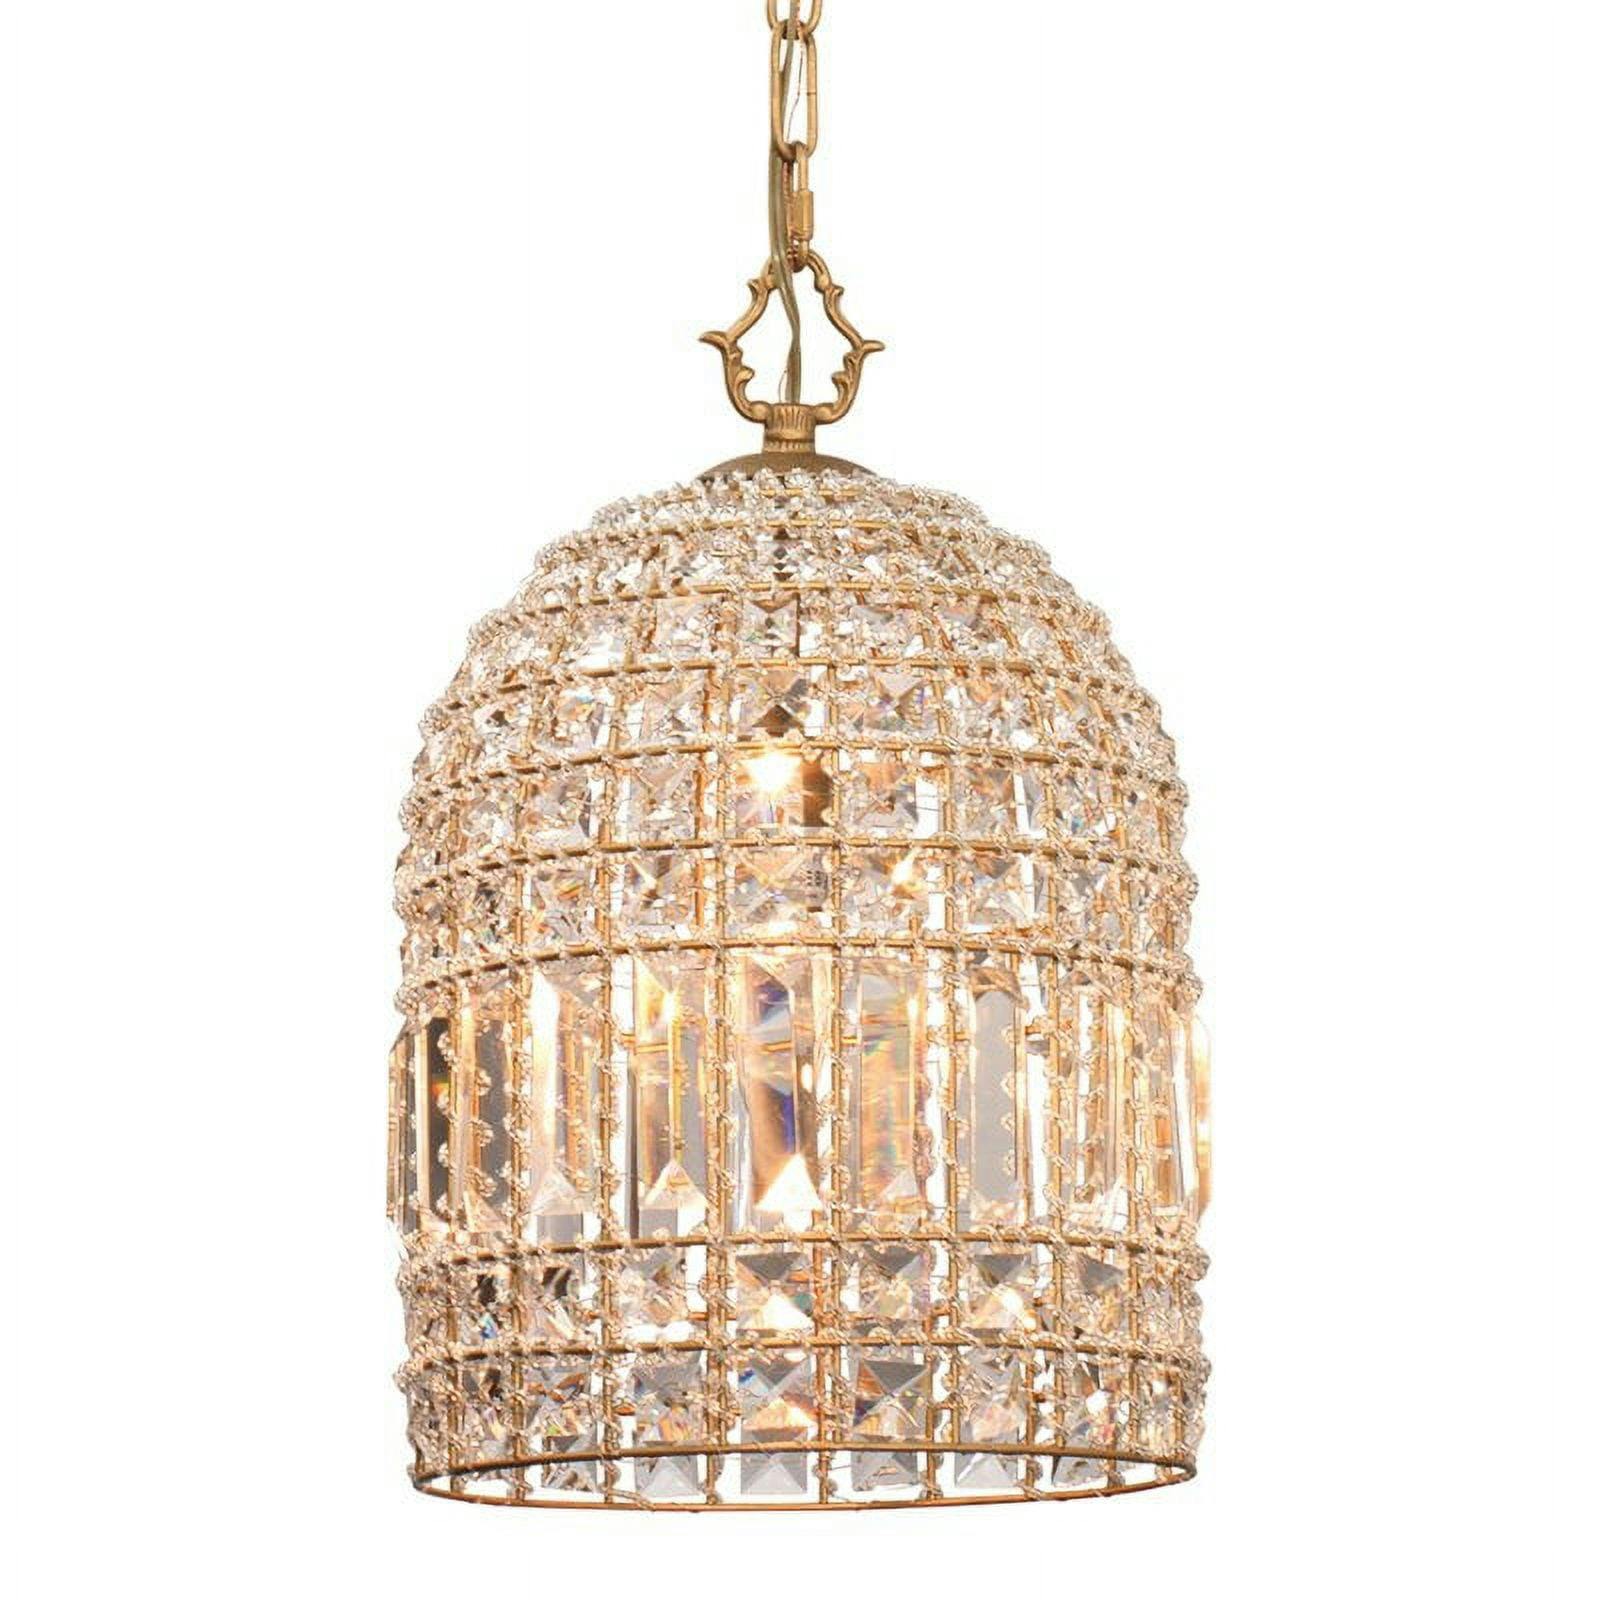 Versailles-Inspired Gold Crystal Pendant Chandelier, 15" Height